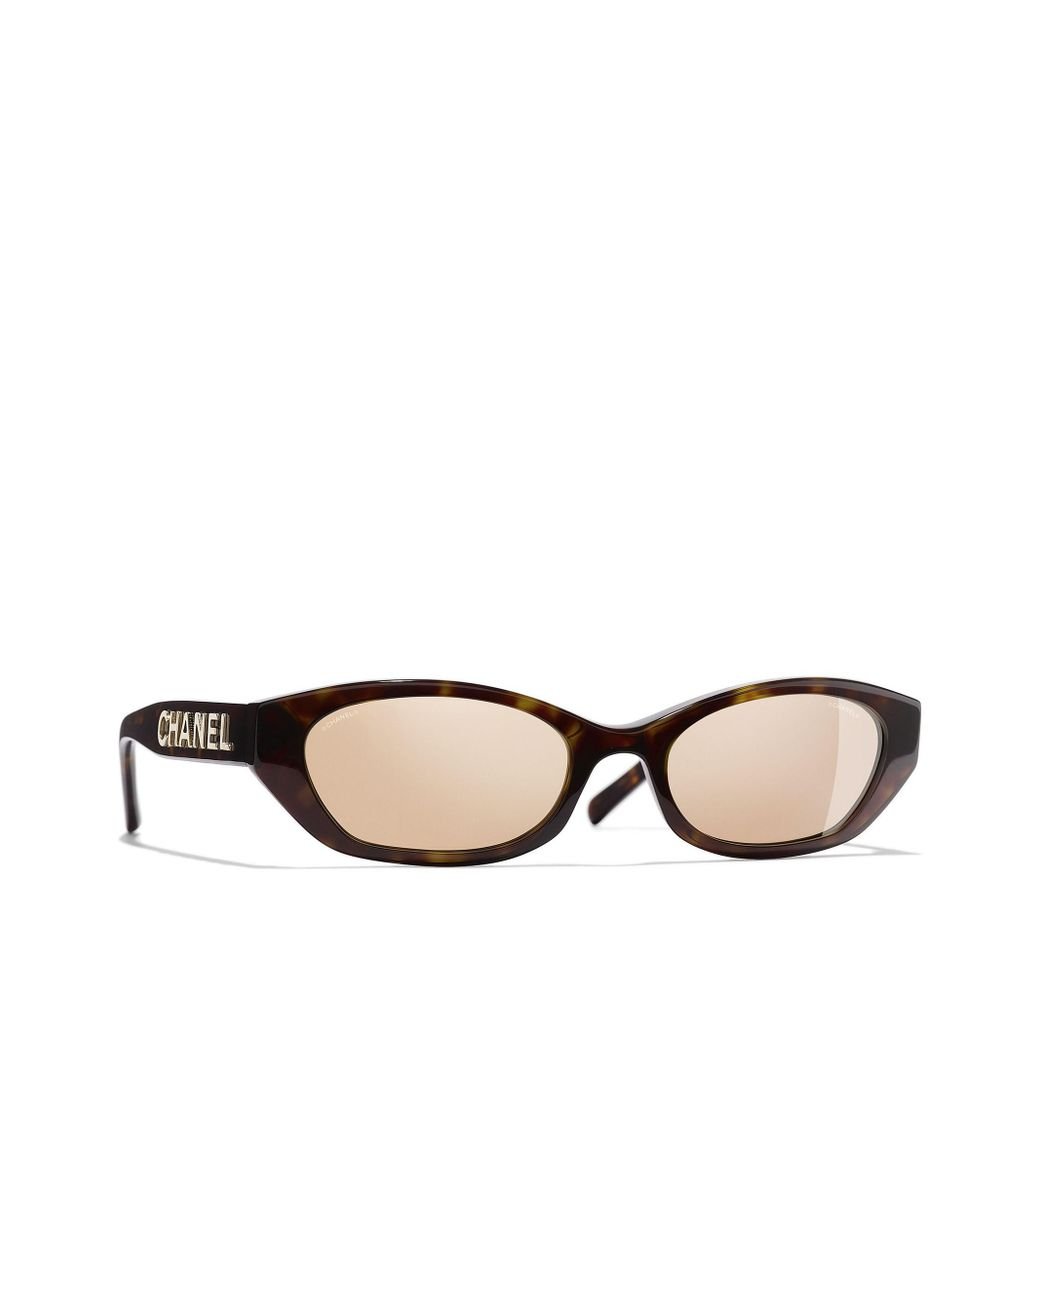 Chanel Rectangle Sunglasses in Brown | Lyst